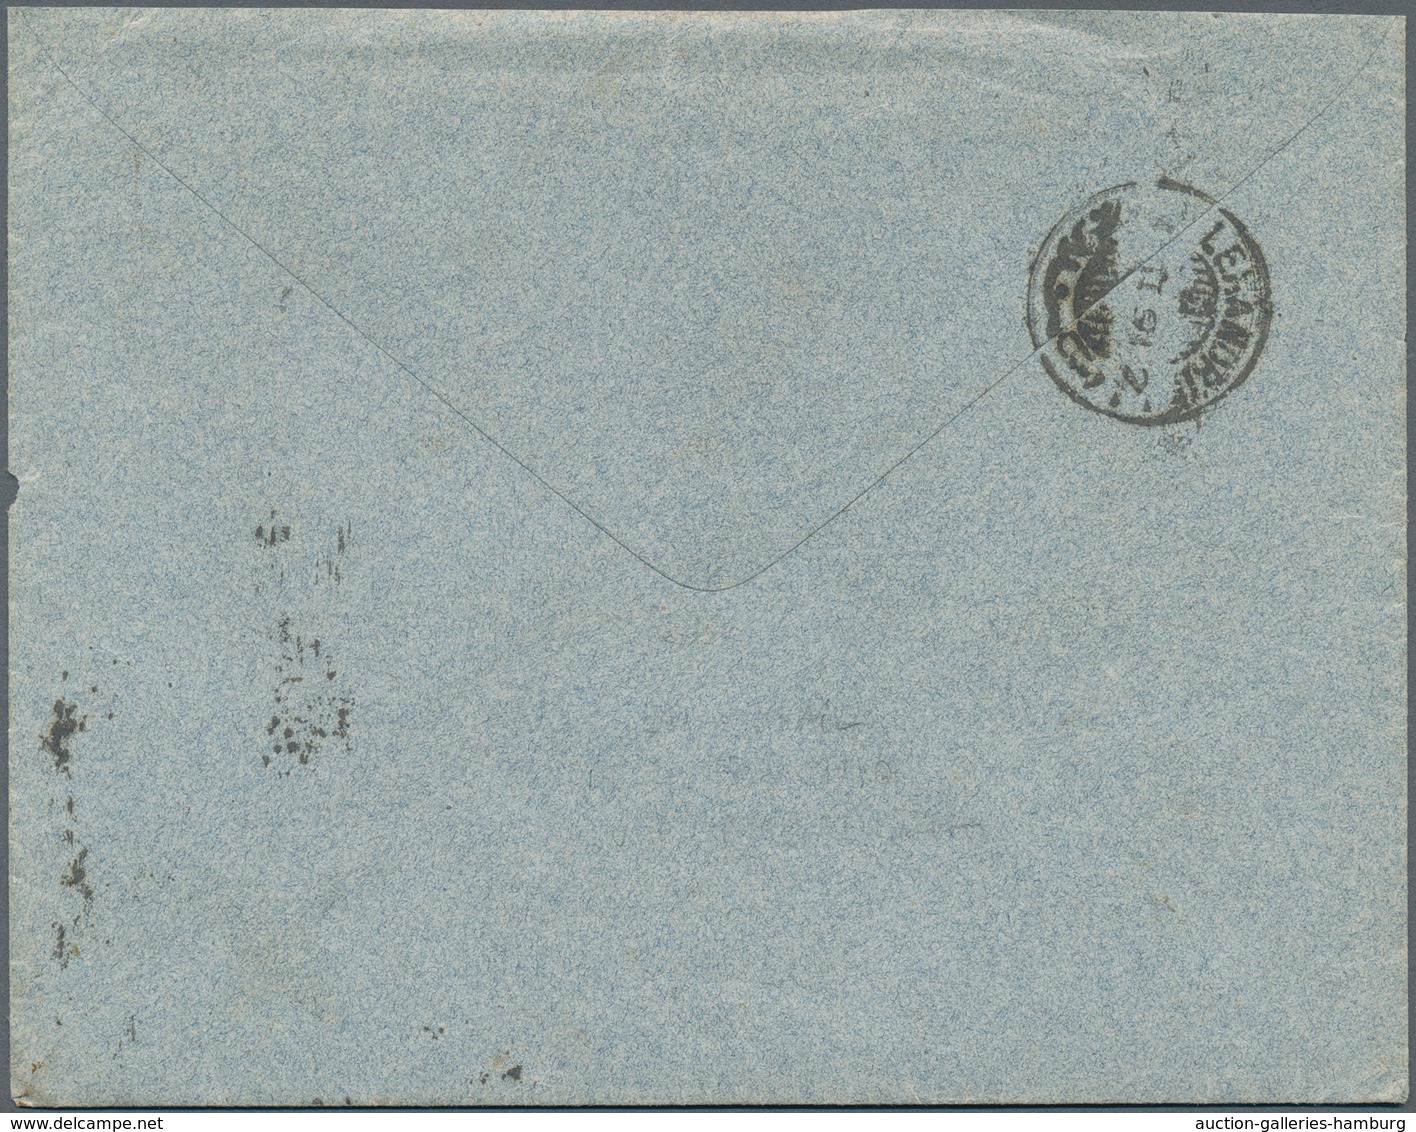 Russland: 1891:Commercial Cover (with Enclosed Letter In Greek), Printed "Georges Bougadis, Odessa", - Covers & Documents